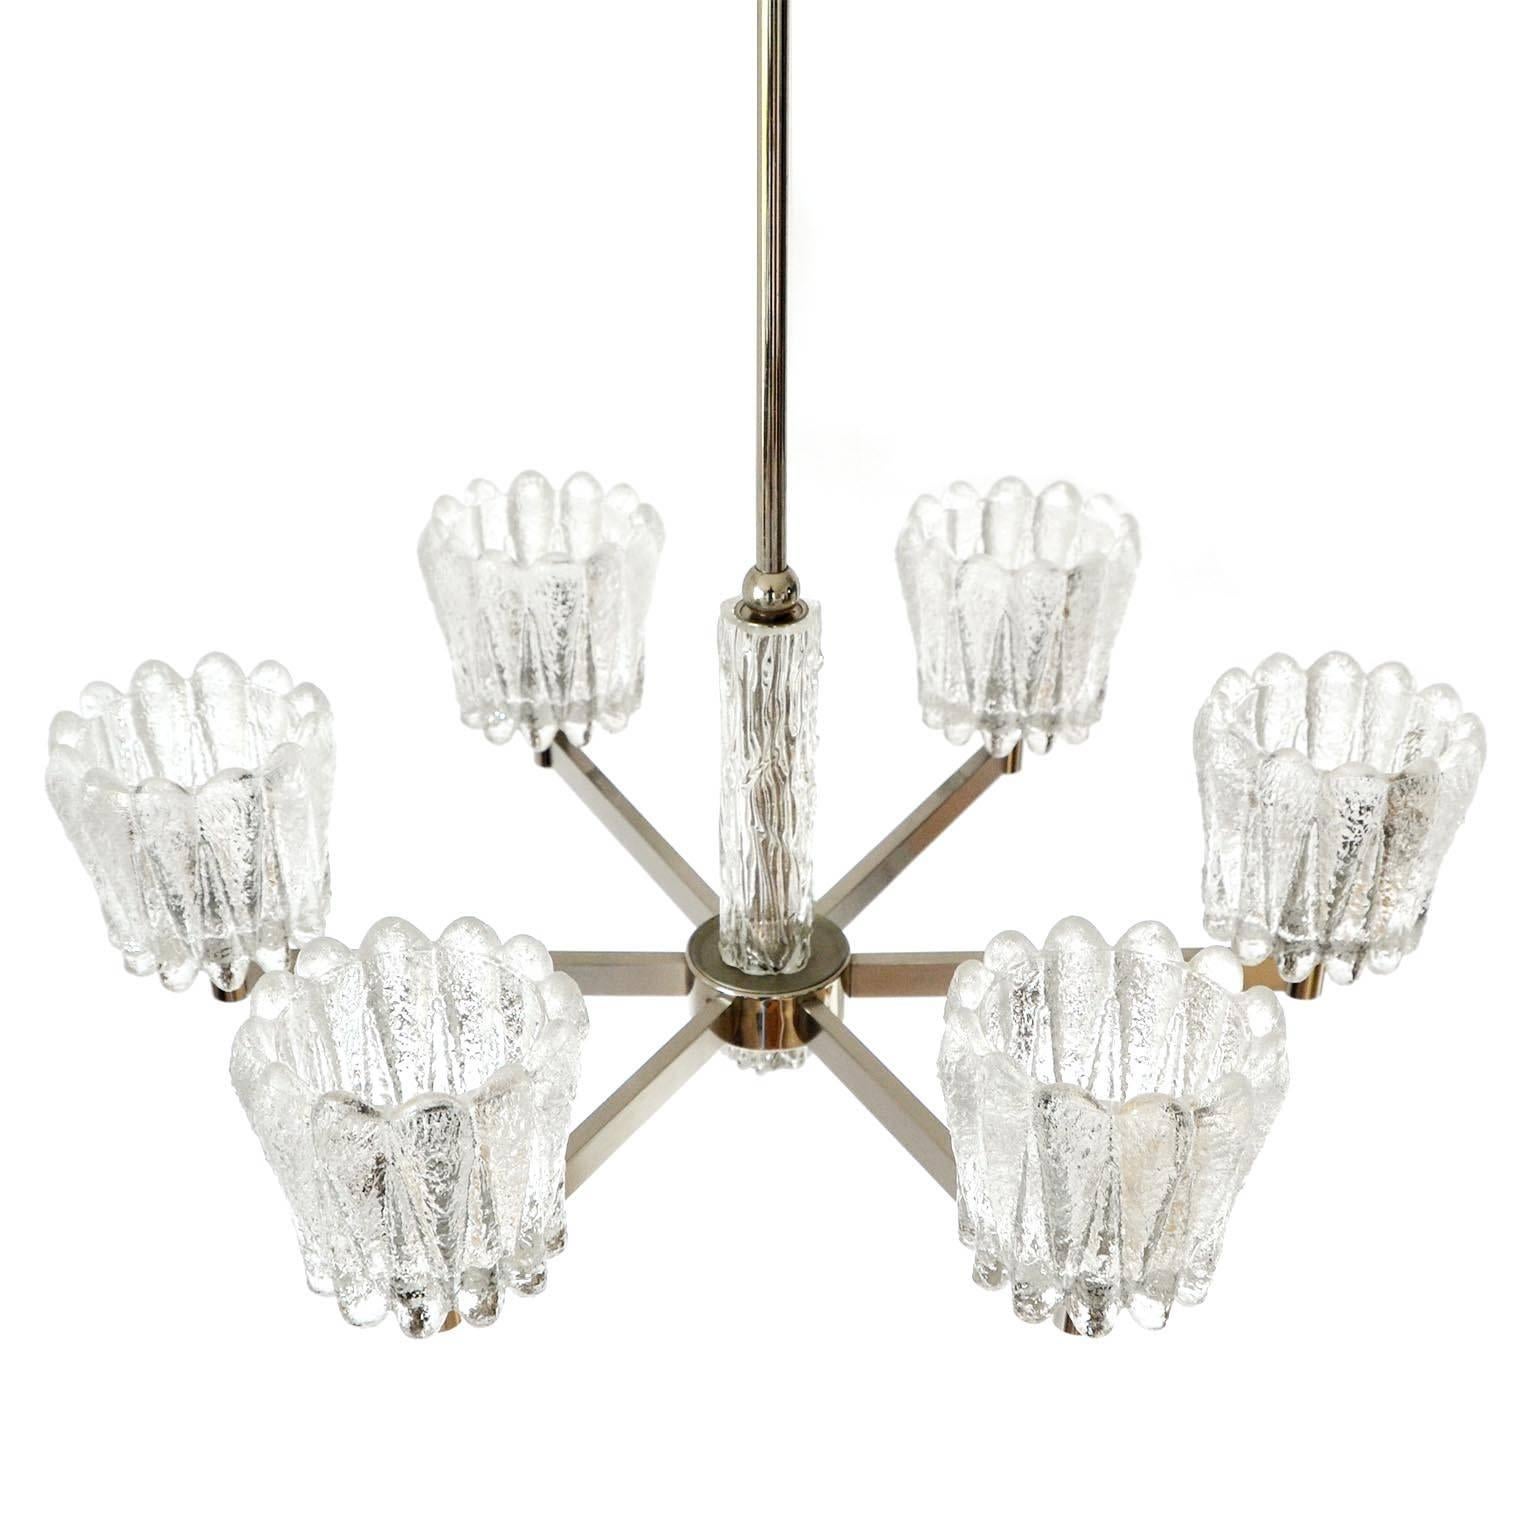 A beautiful and high quality chandelier by Carl Fagerlund for Orrefors, Sweden, manufactured in midcentury, circa 1960.
The lamp is made of a nickeled or chromed brass frame and frosted textured ice glass lamp shades.
The fixture has six arms with